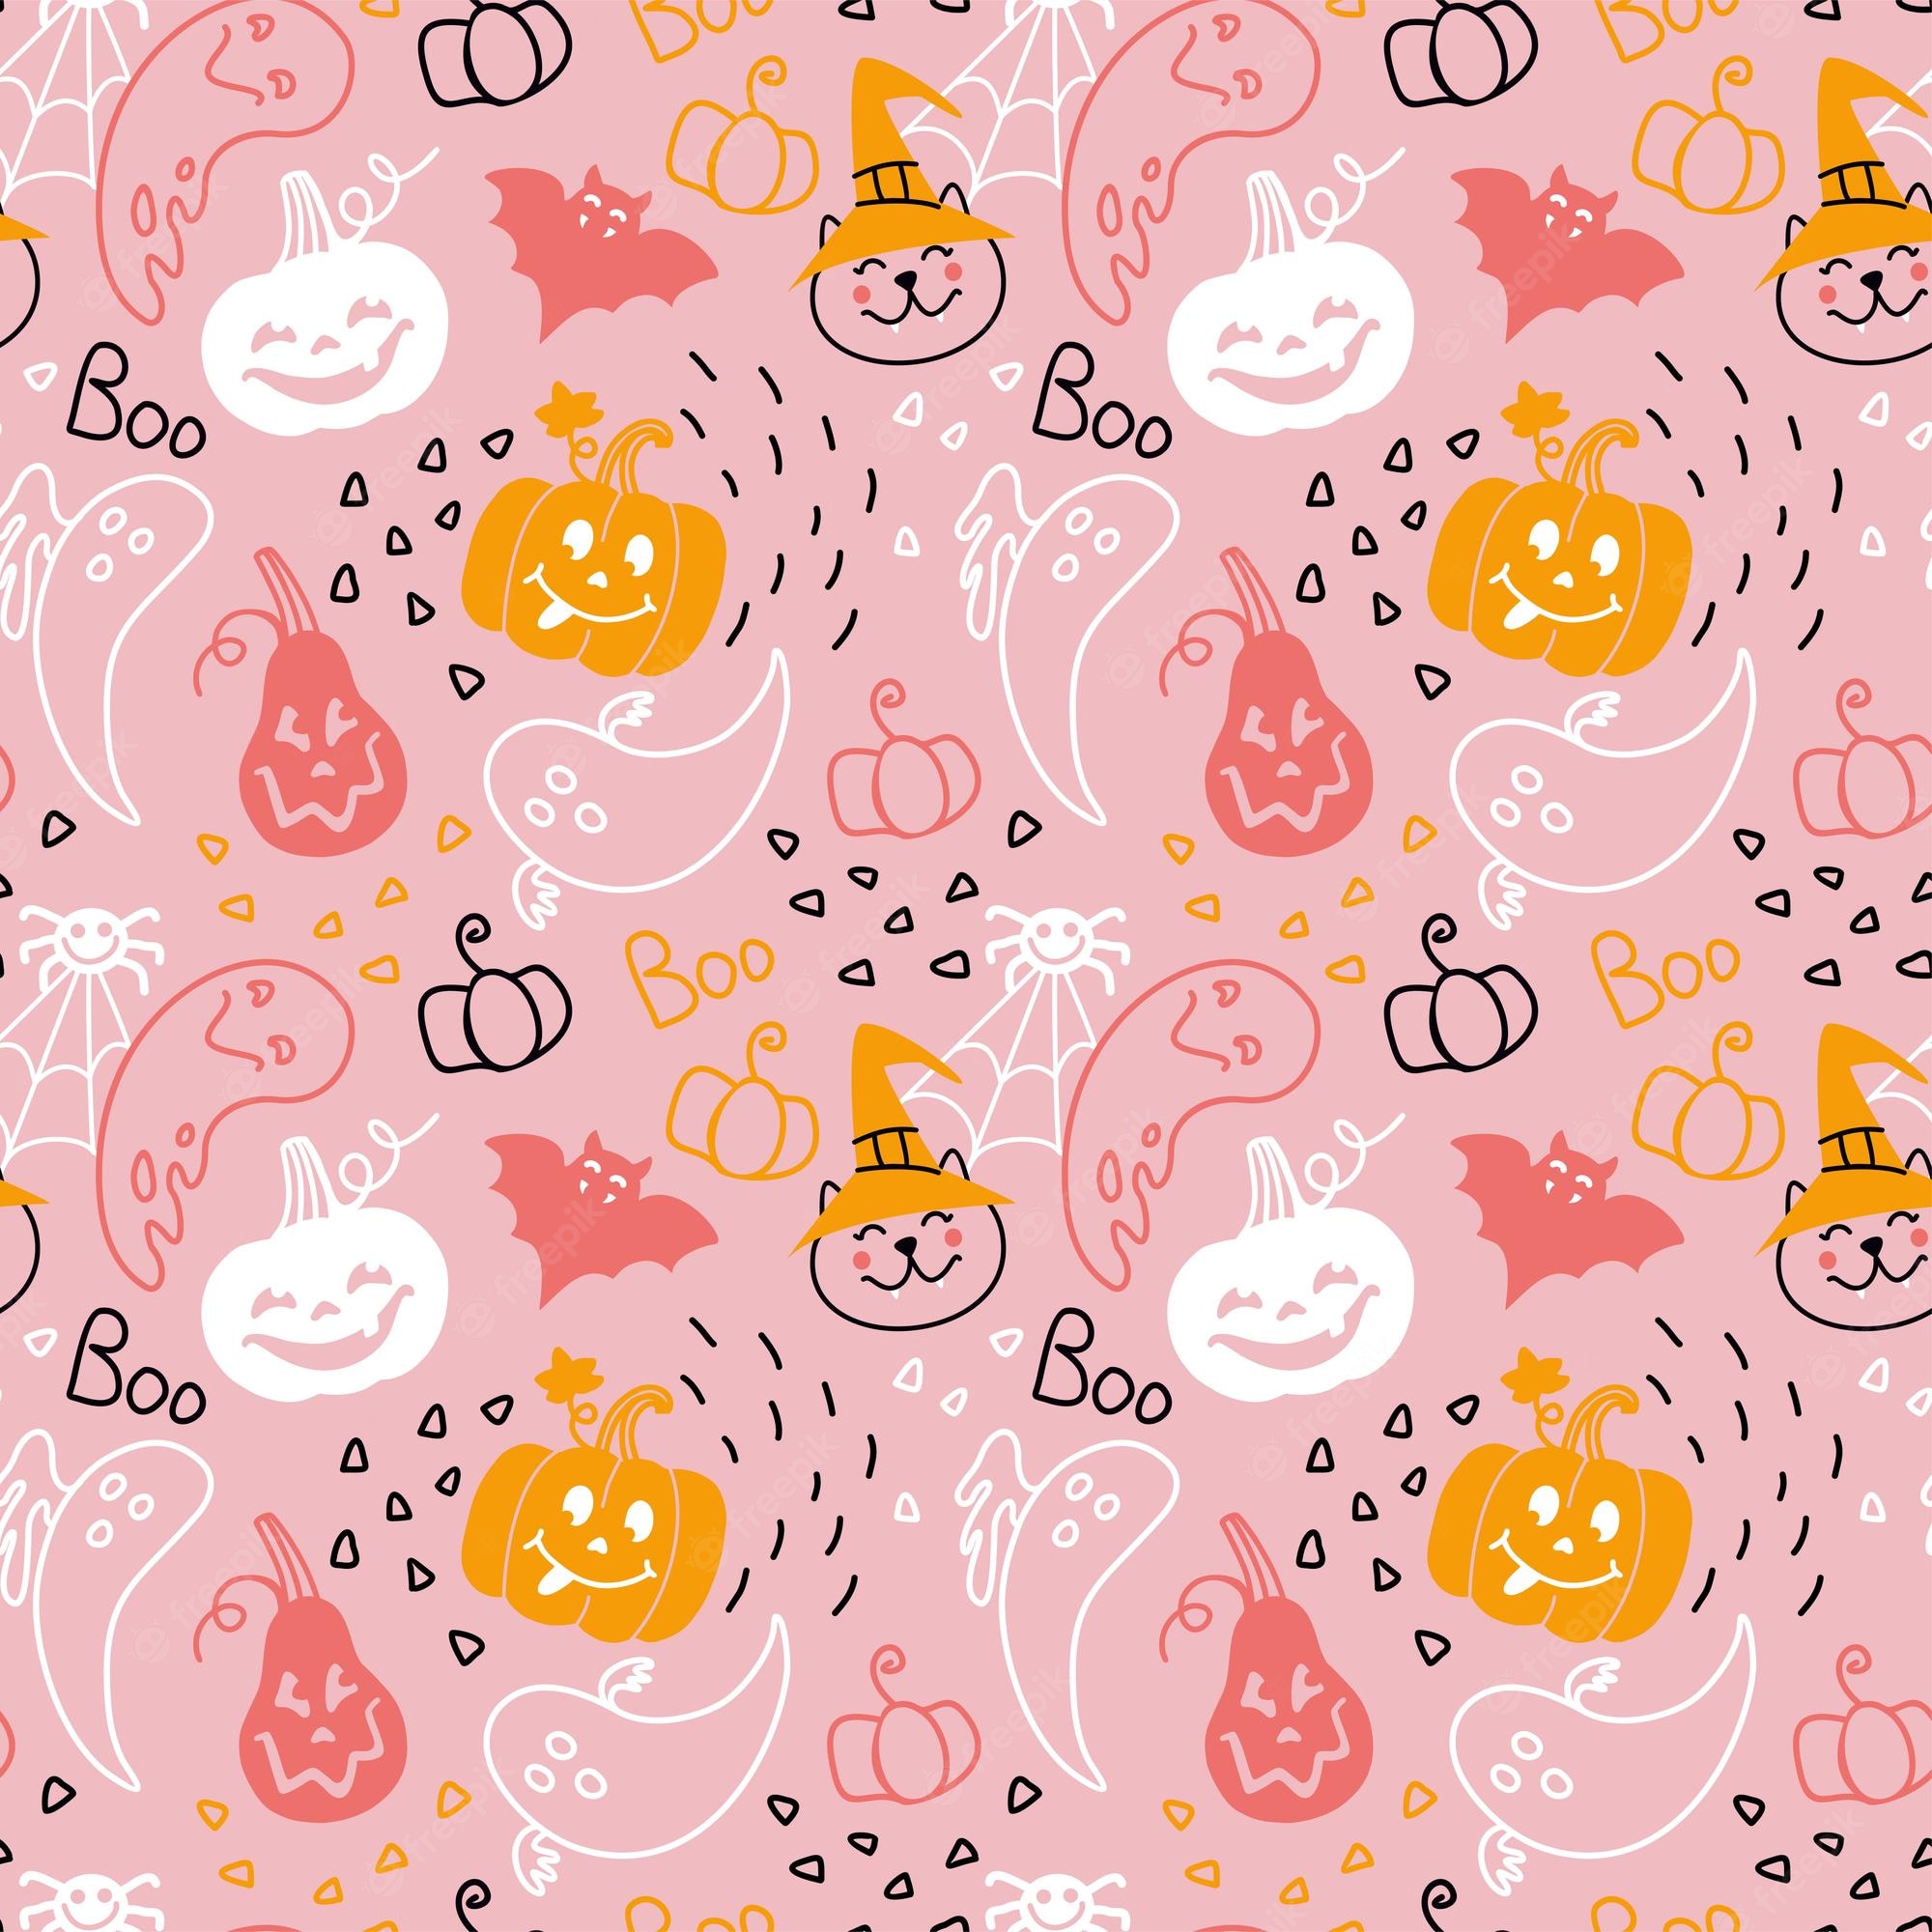 Halloween Decorations On Pastel Pink Background Halloween Concept Flat Lay  Top View Copy Space Stock Photo  Download Image Now  iStock